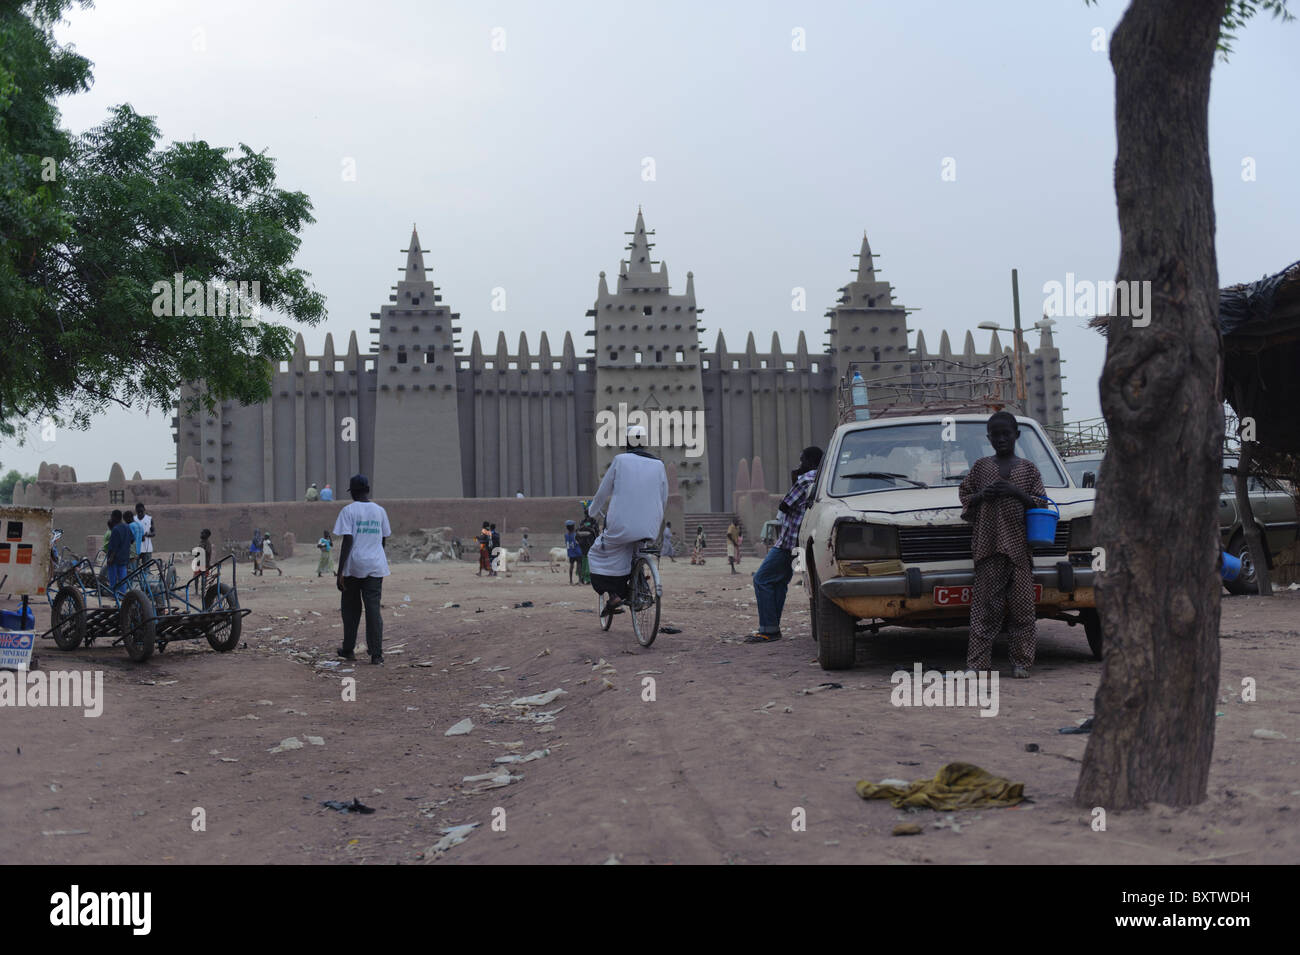 Street scene in front of the Great  Mosque of Djenné, Mali Stock Photo